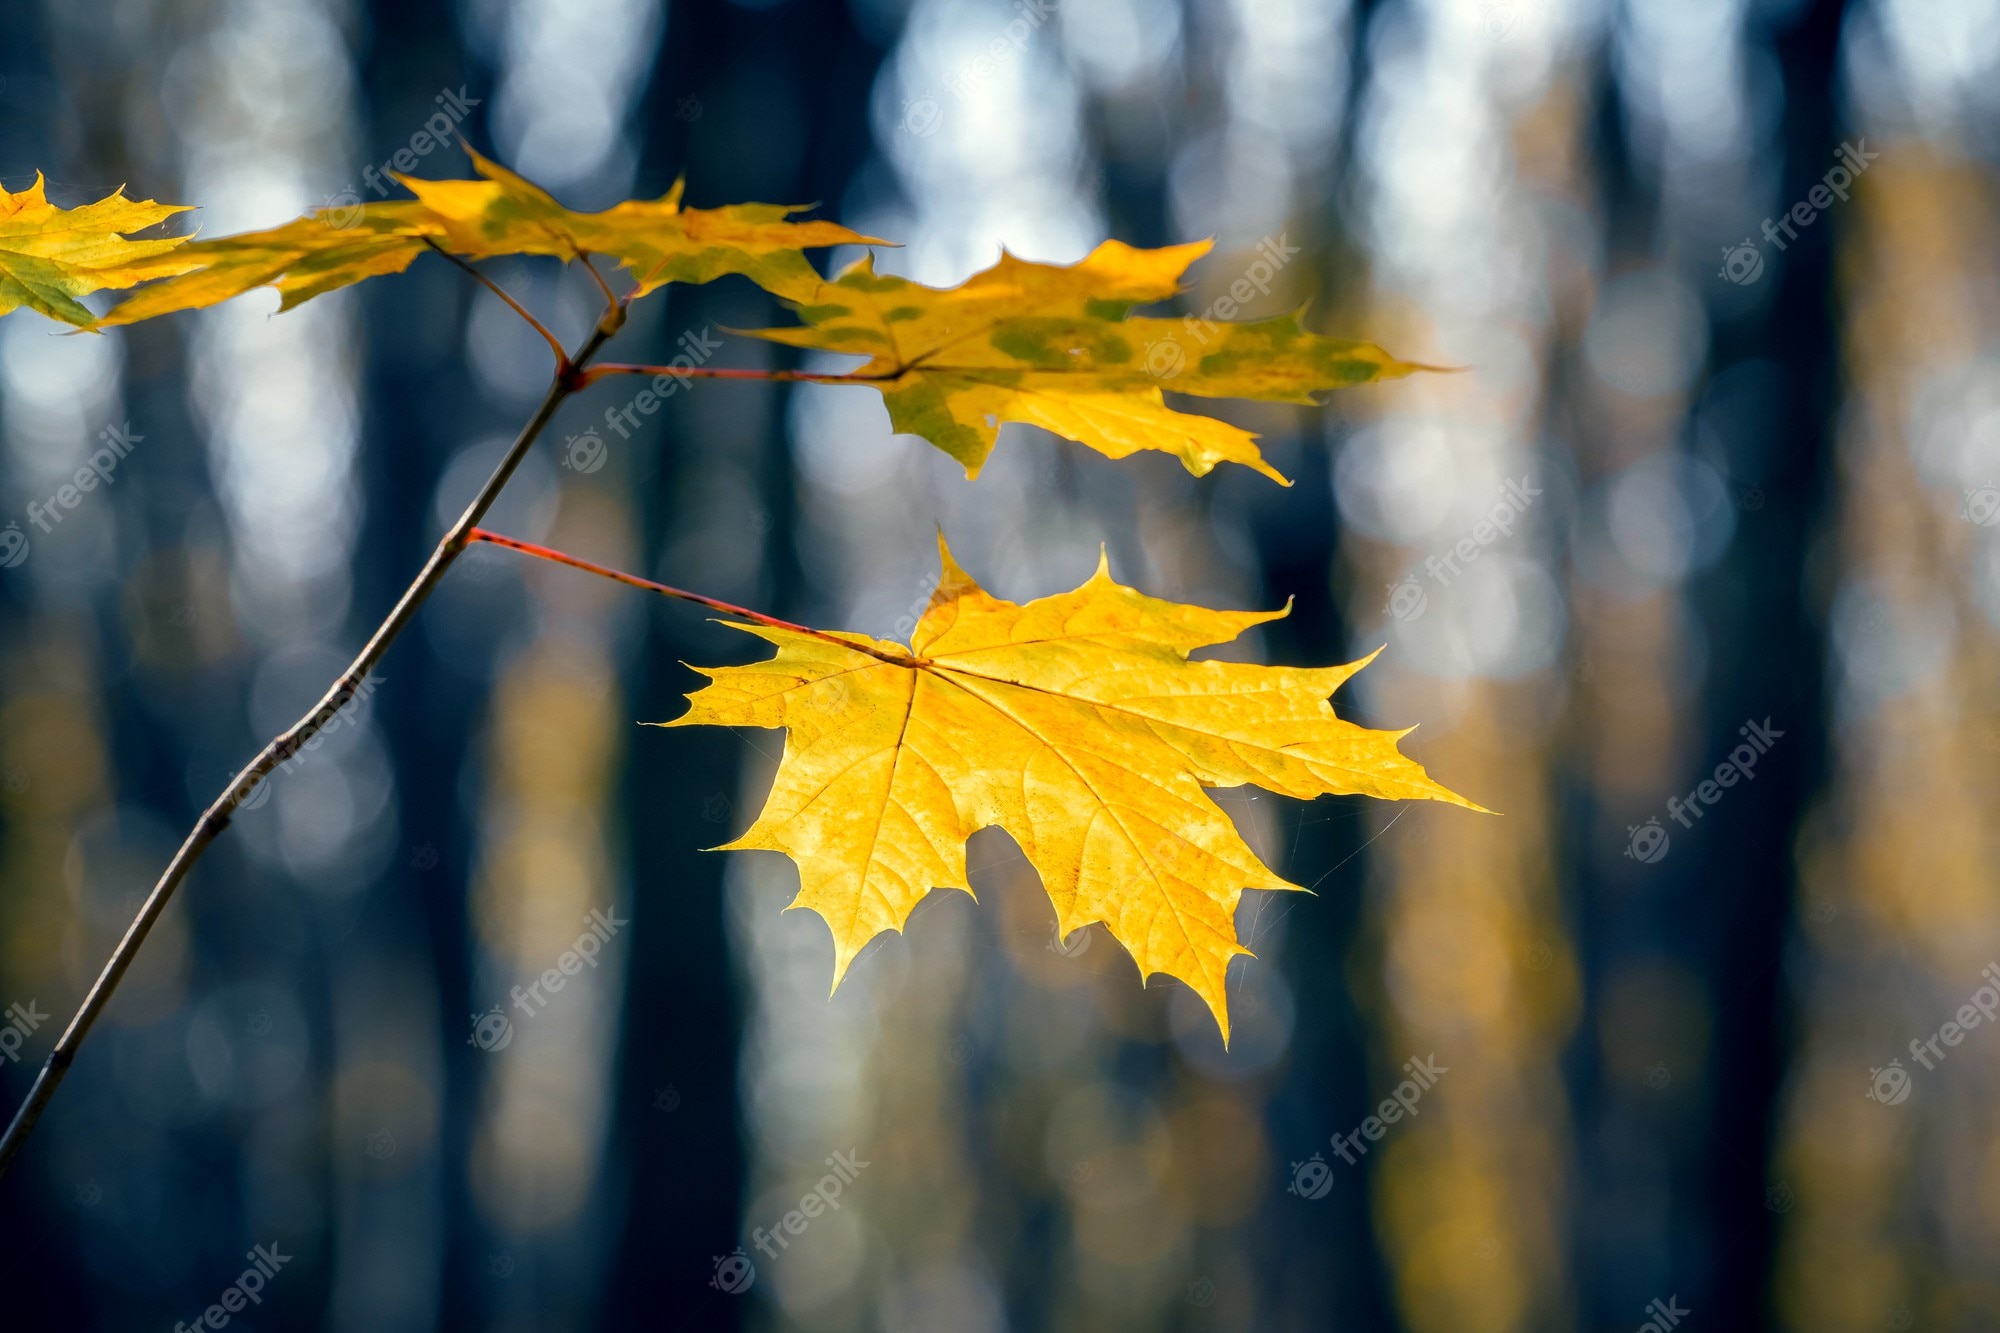 Premium photo autumn dark forest with yellow maple leaves on a tree branch on a blurred background